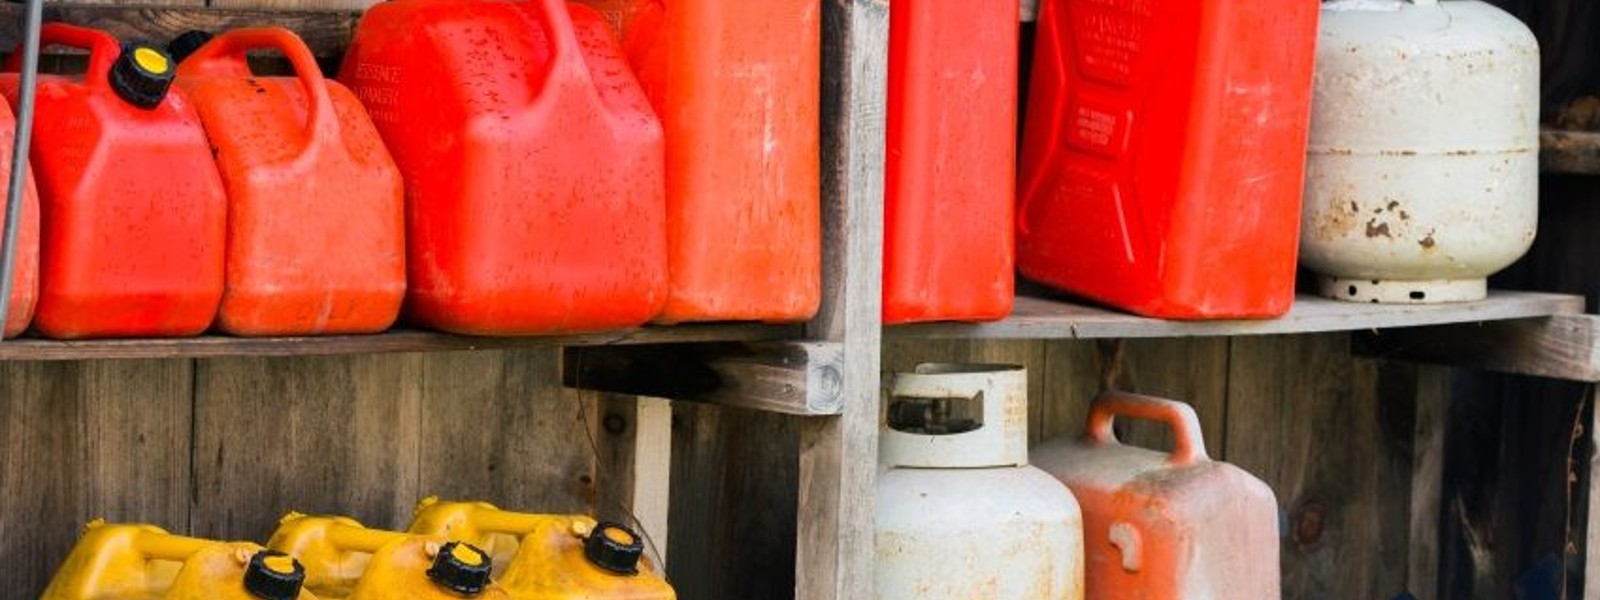 Over 175,000 litres of illegally accumulated fuel